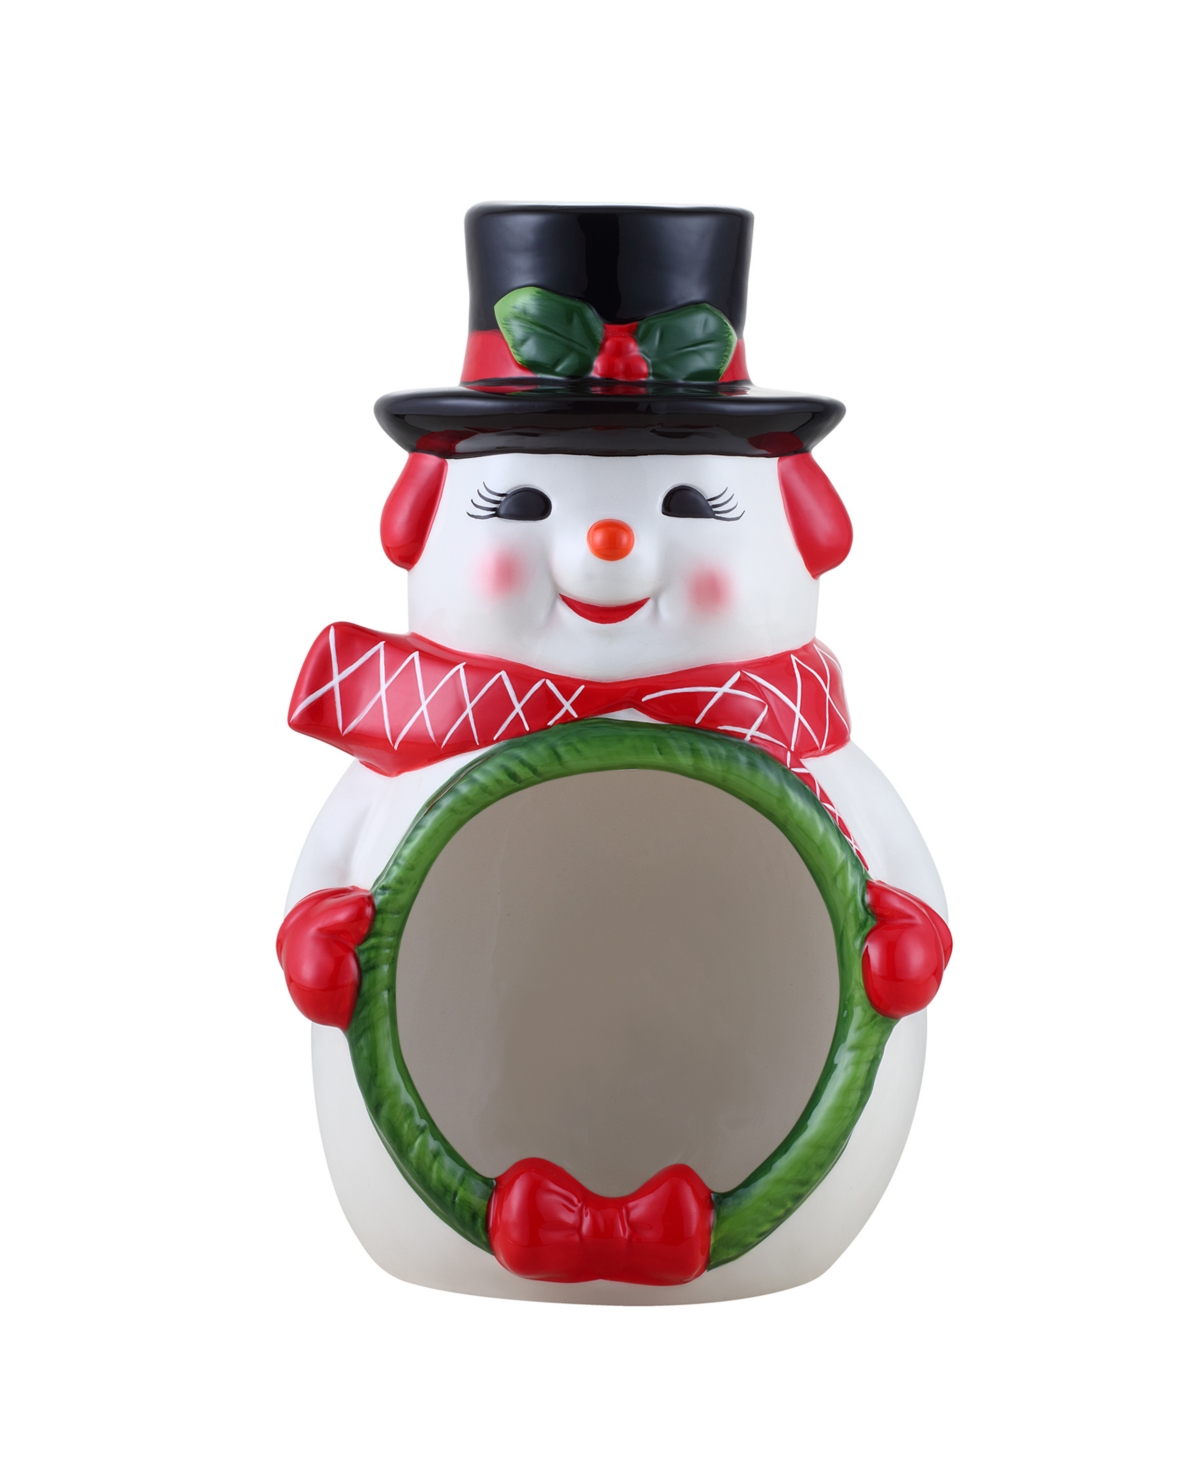 Mr. Christmas 12" Ceramic Musical Snowman Candy Bowl In White